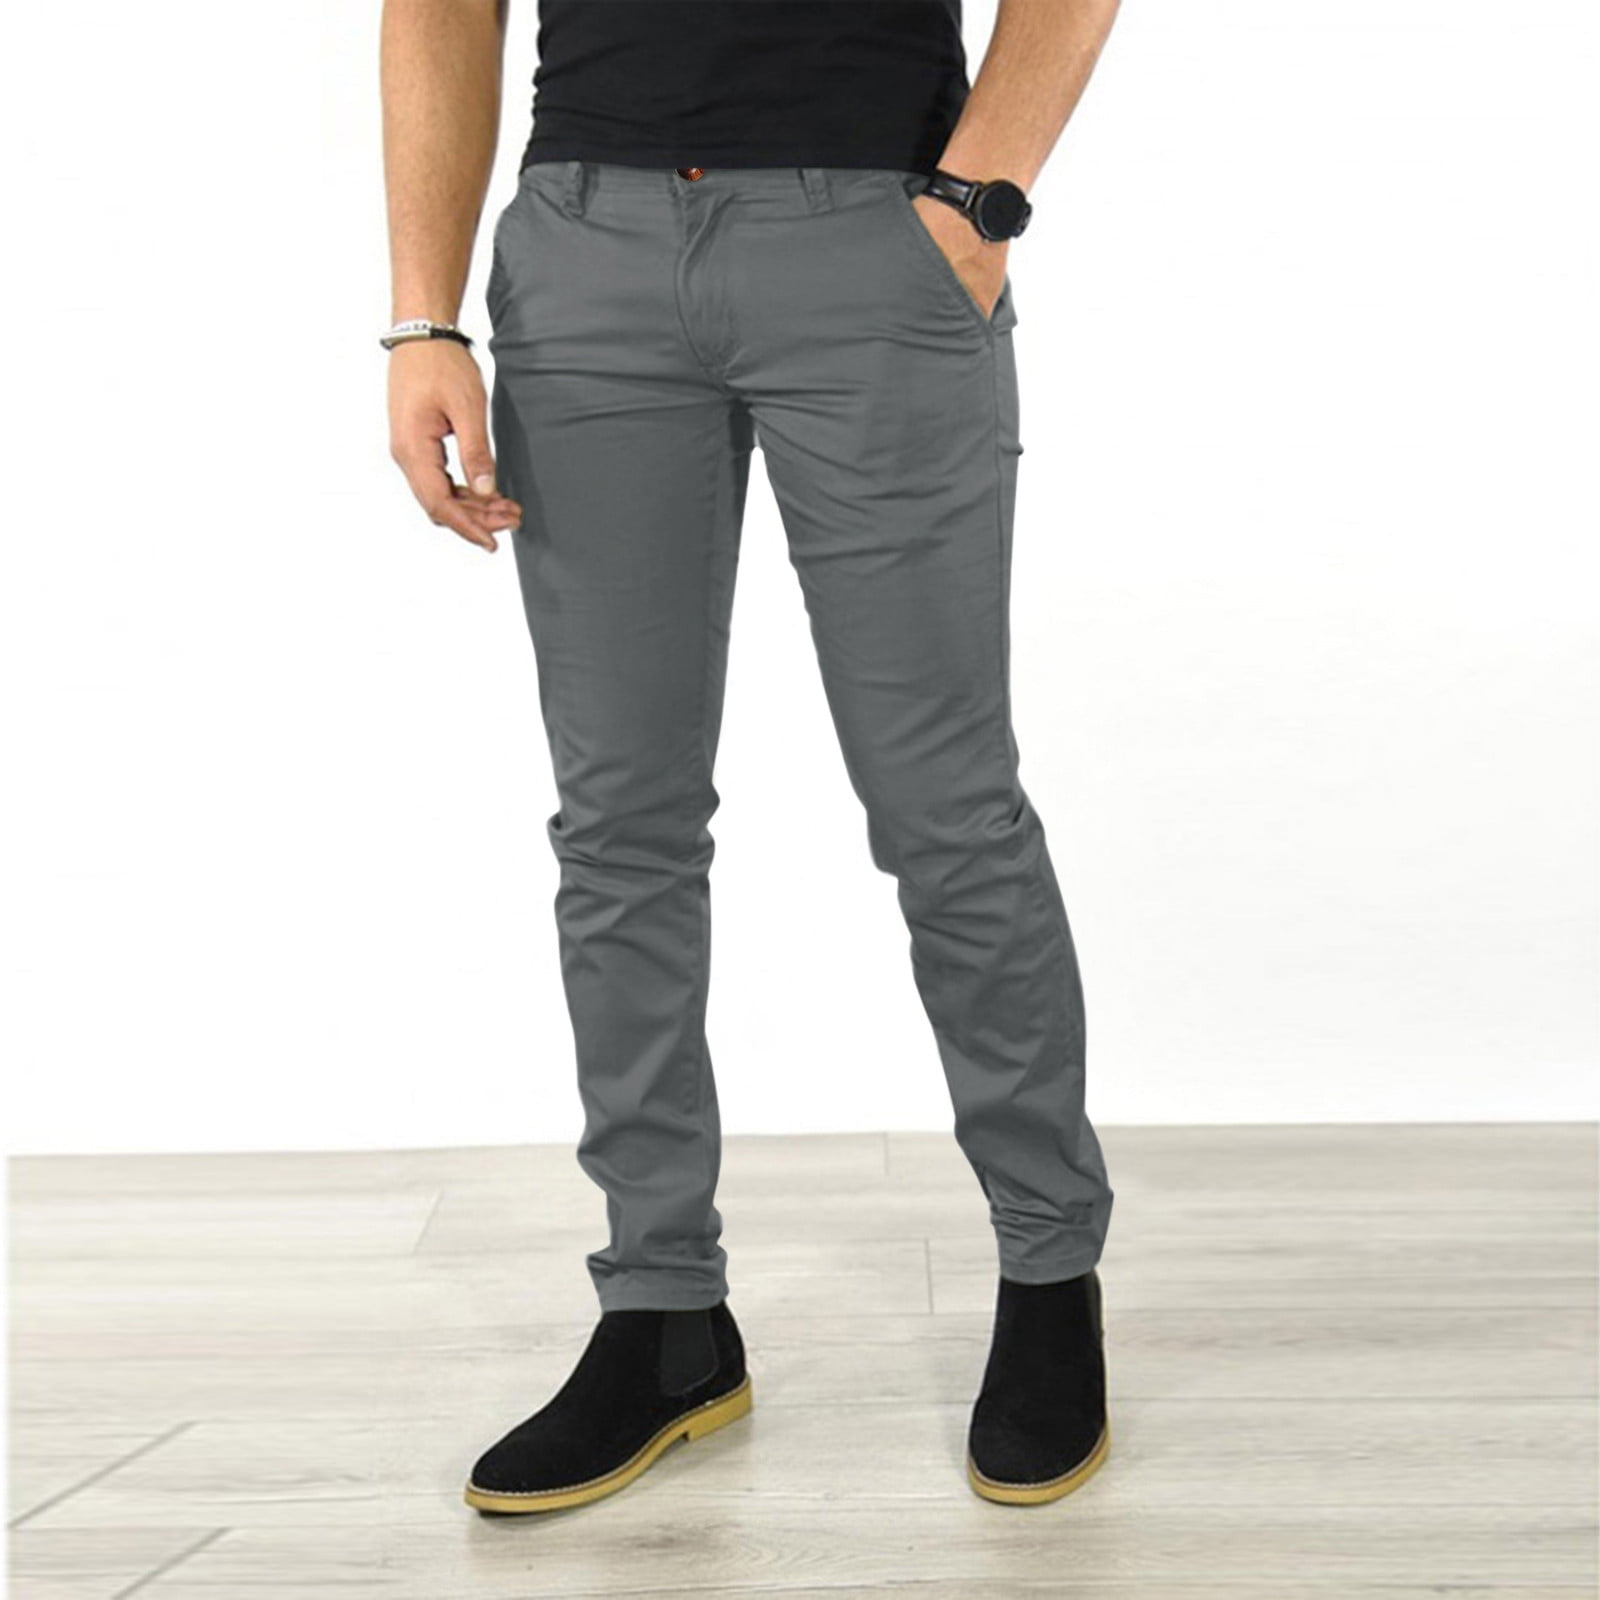 brown mens dress pants male casual business solid slim pants zipper fly  pocket cropped pencil pant trousers 